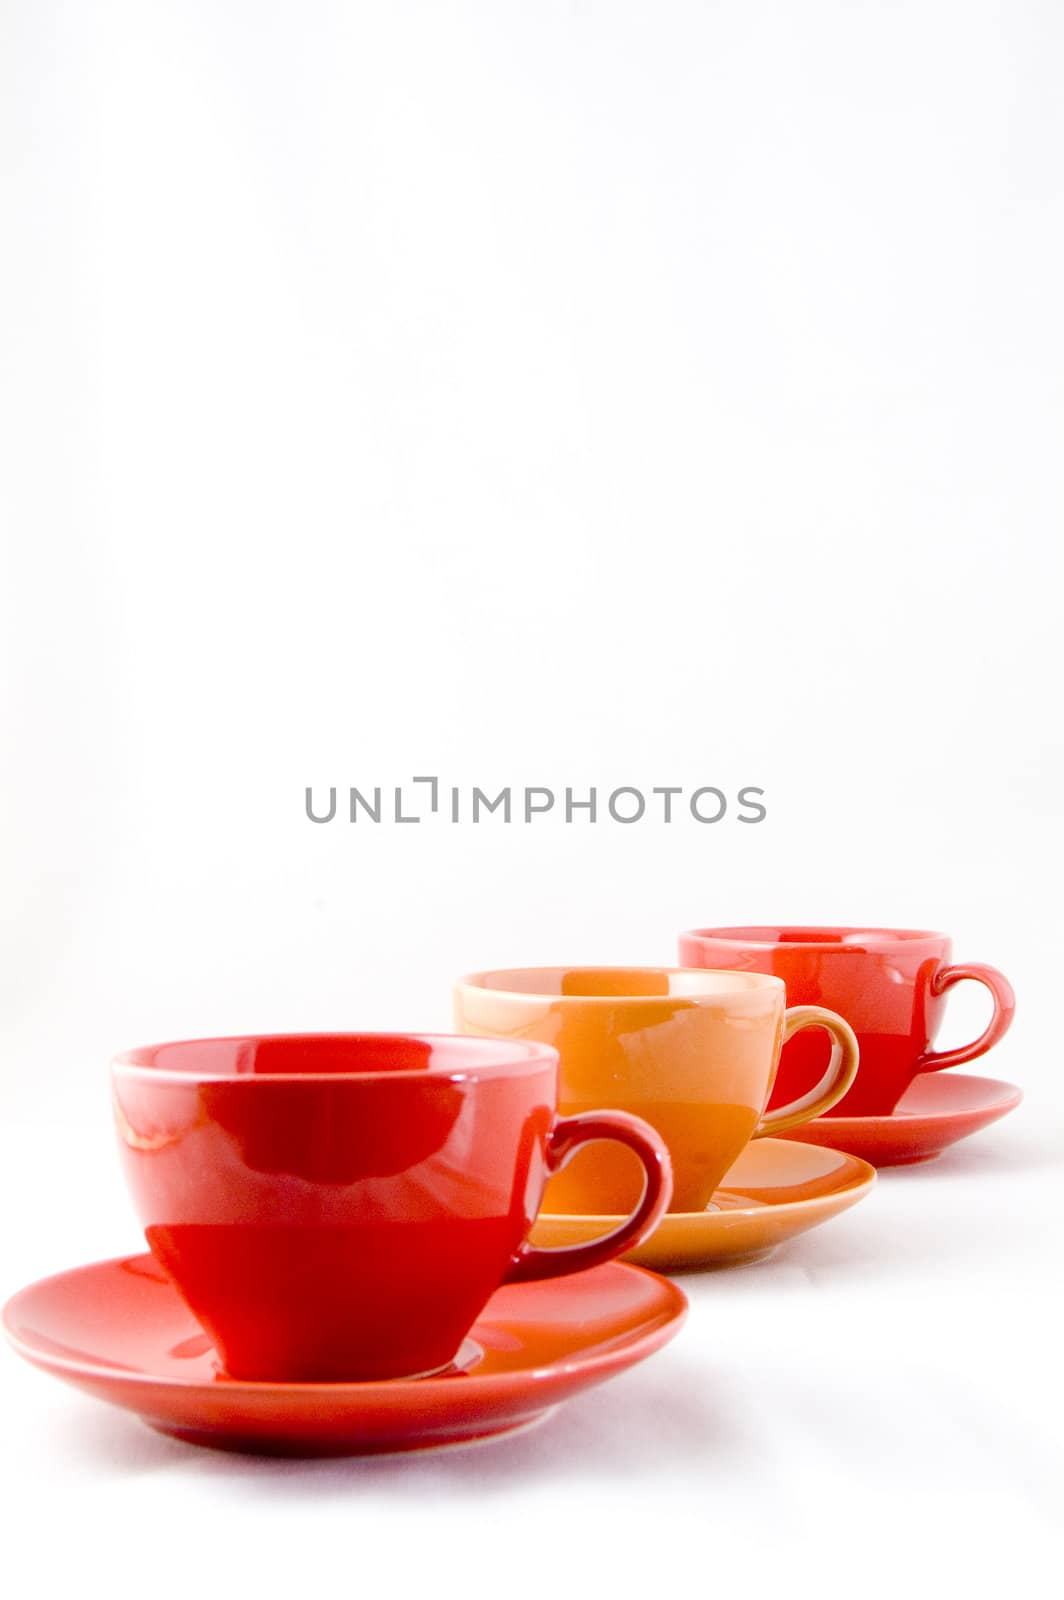 cup and saucer isolated on white background

